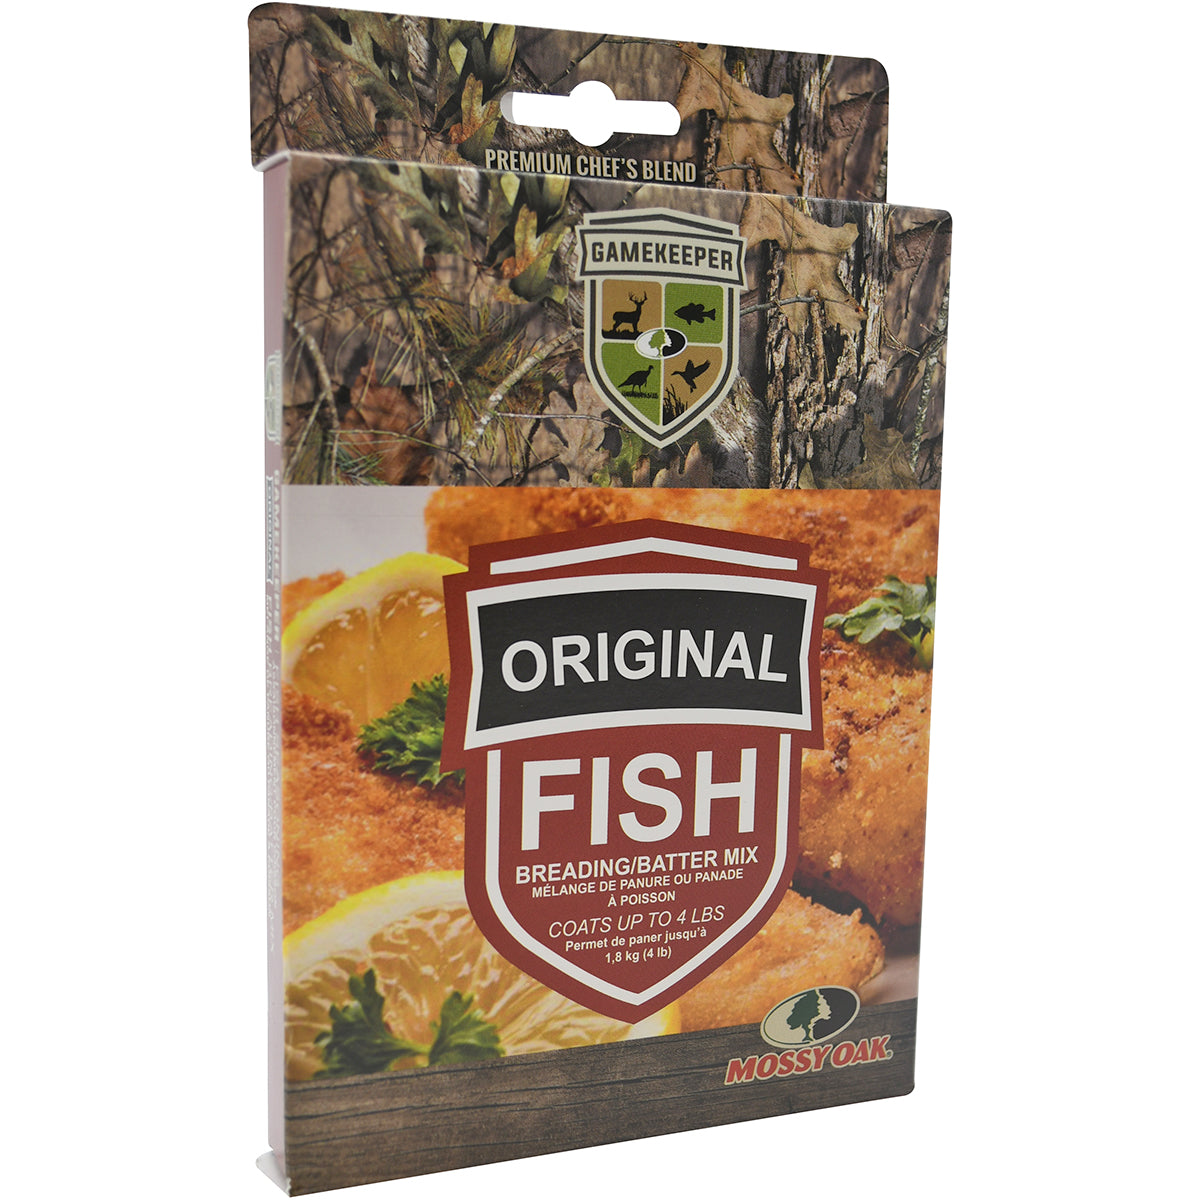 Game Keeper Original Fish Breading and Batter Mix Game Keeper